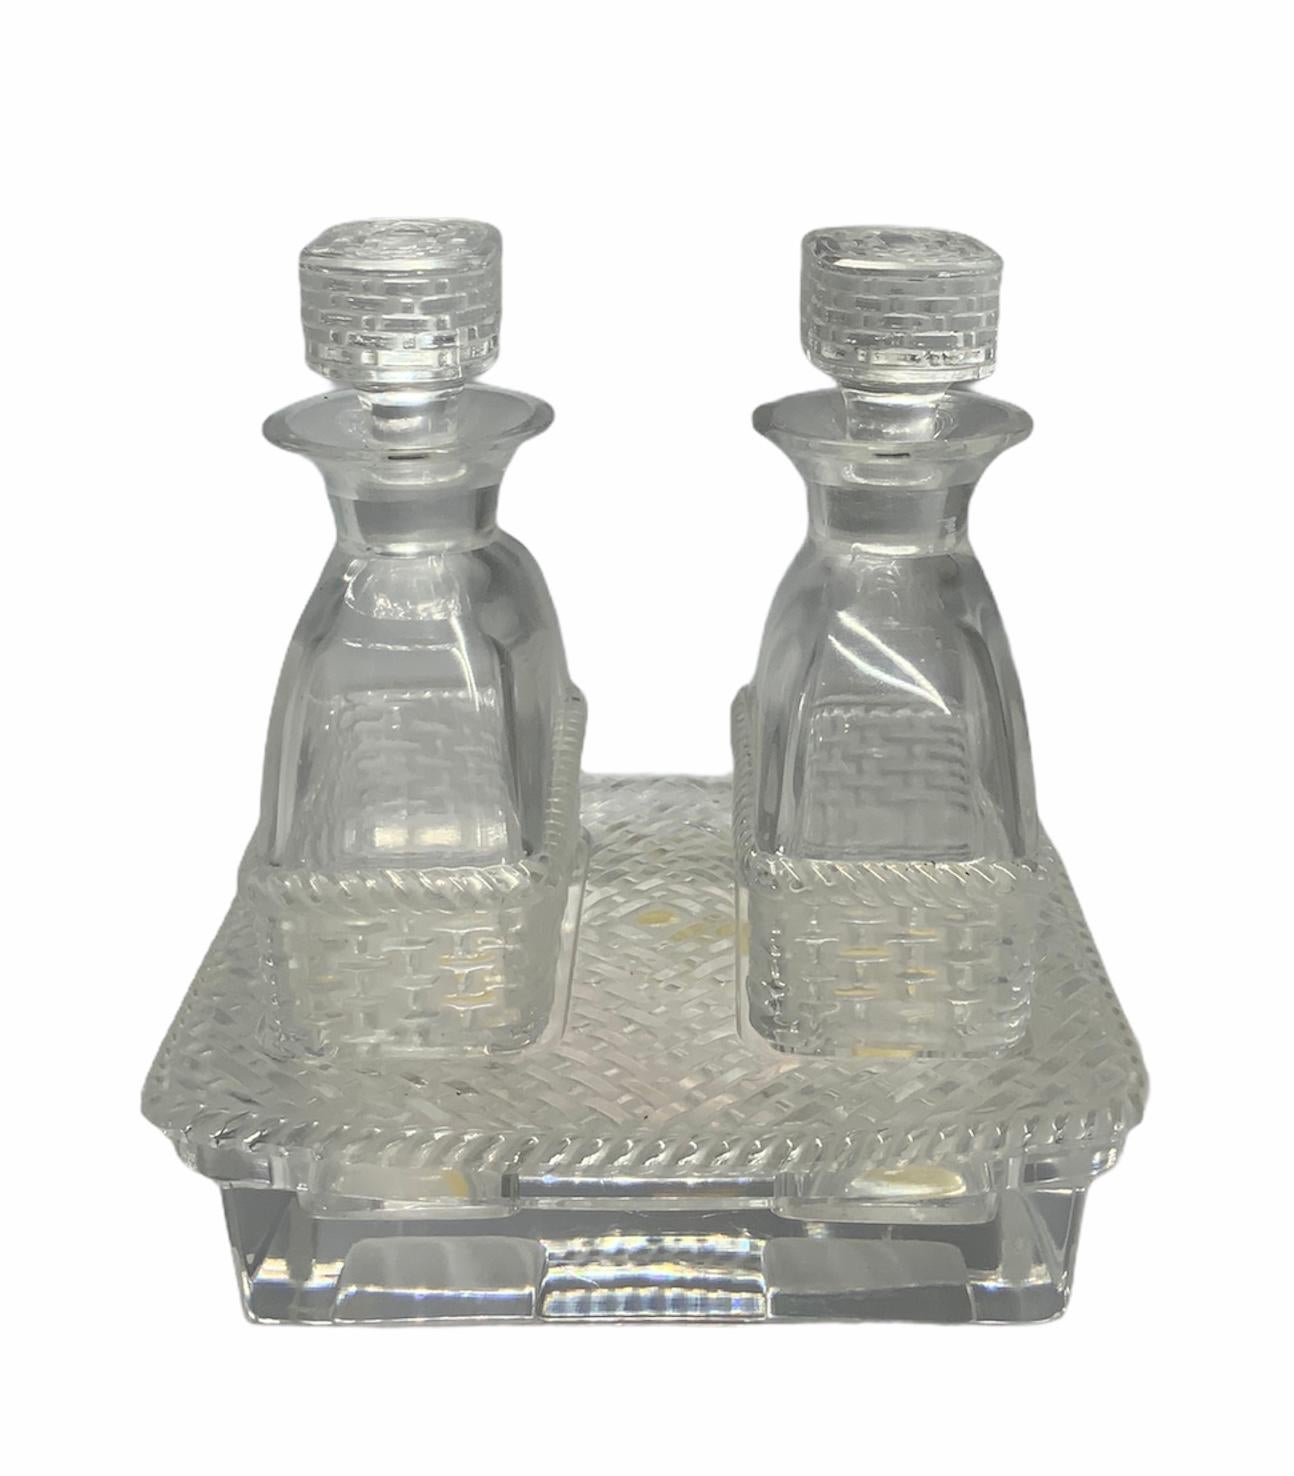 This set of oil and vinegar crystal bottles are decorated with a basket weave design in the lower part of them and also in the stoppers. The top of the tray follows the same pattern. Under the tray is signed Lalique.